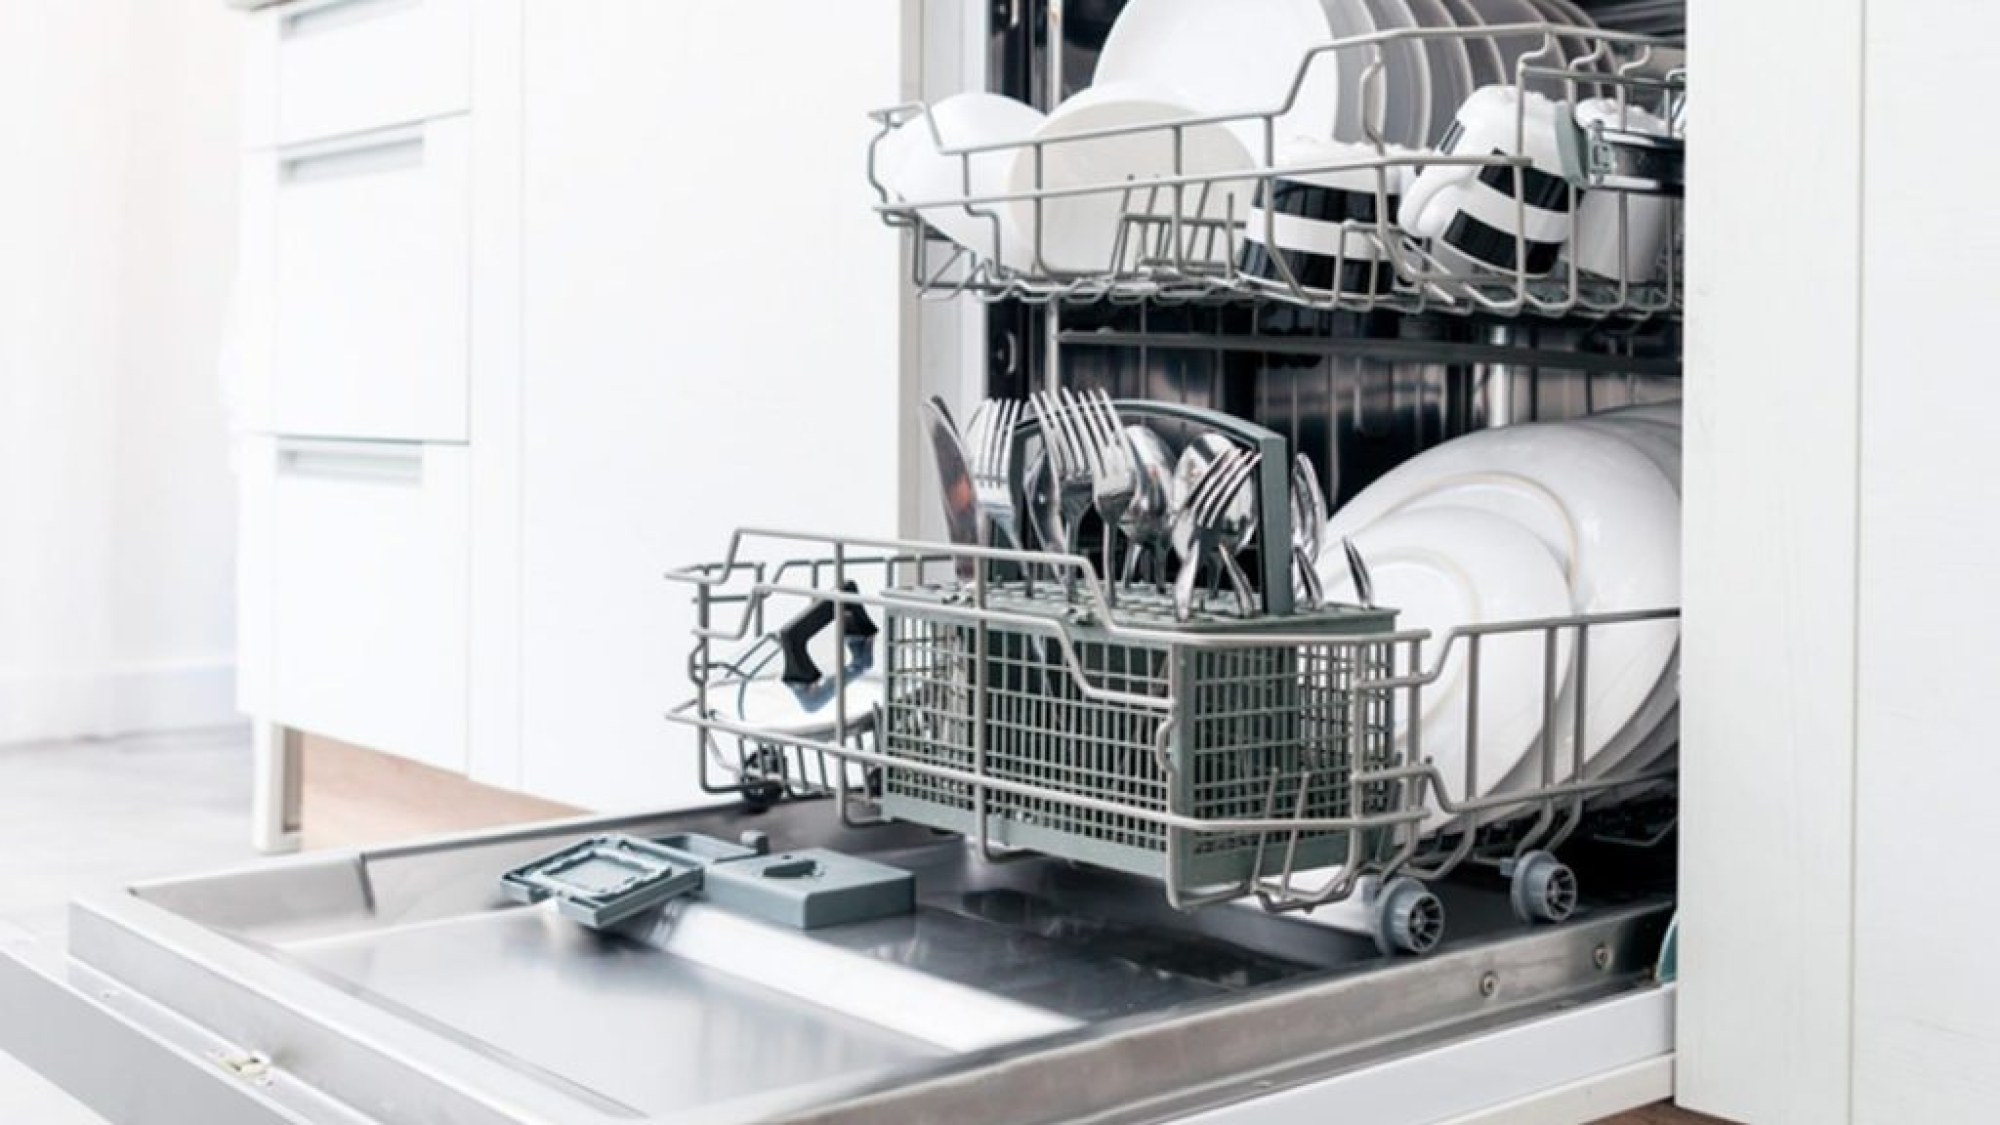 Common dishwasher problems that you can face while using it